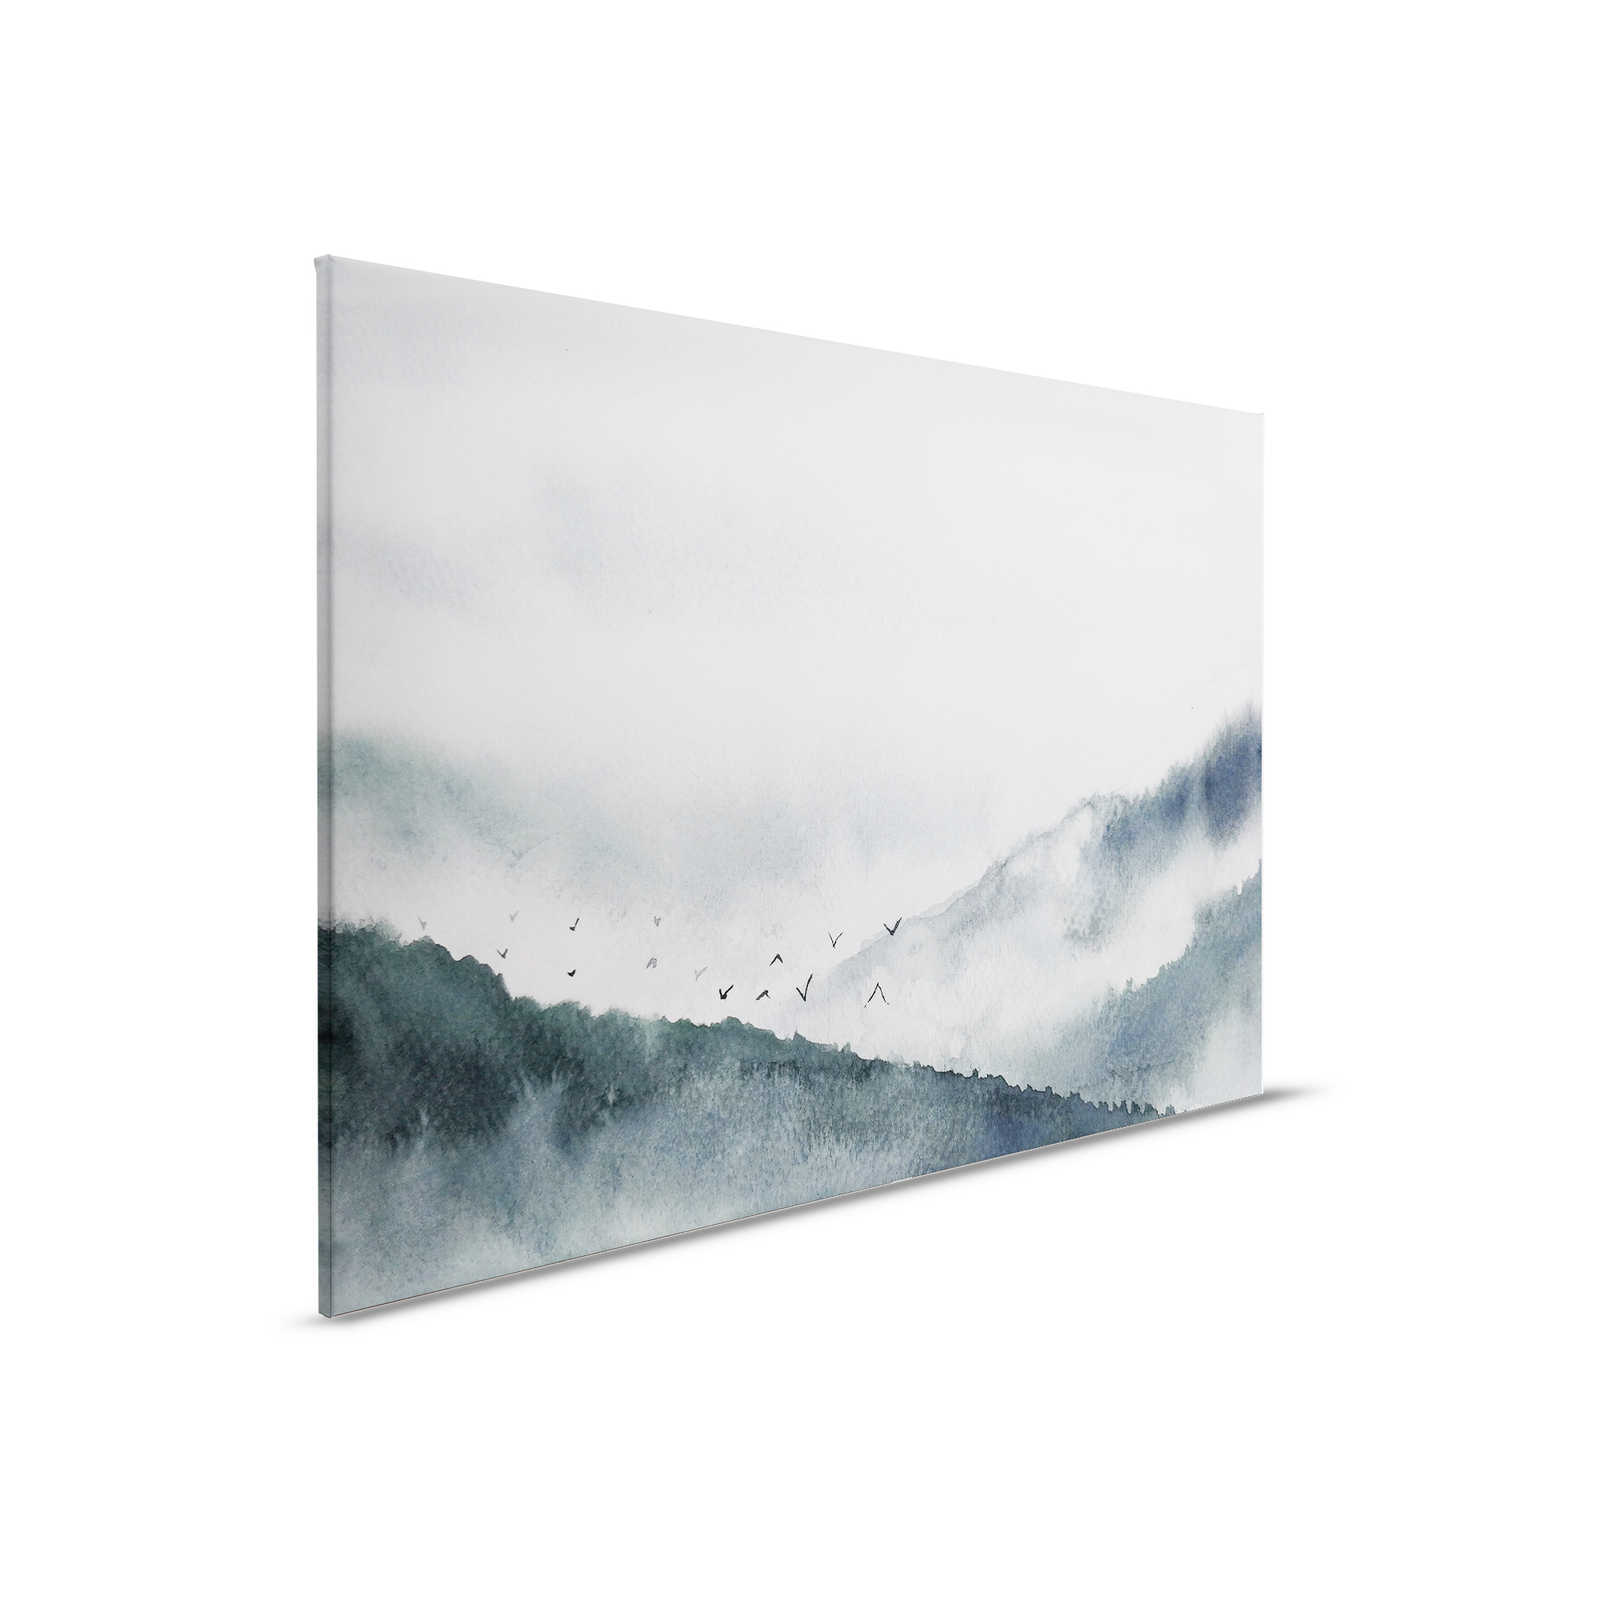         Canvas with foggy landscape in painting style | grey, black - 0.90 m x 0.60 m
    